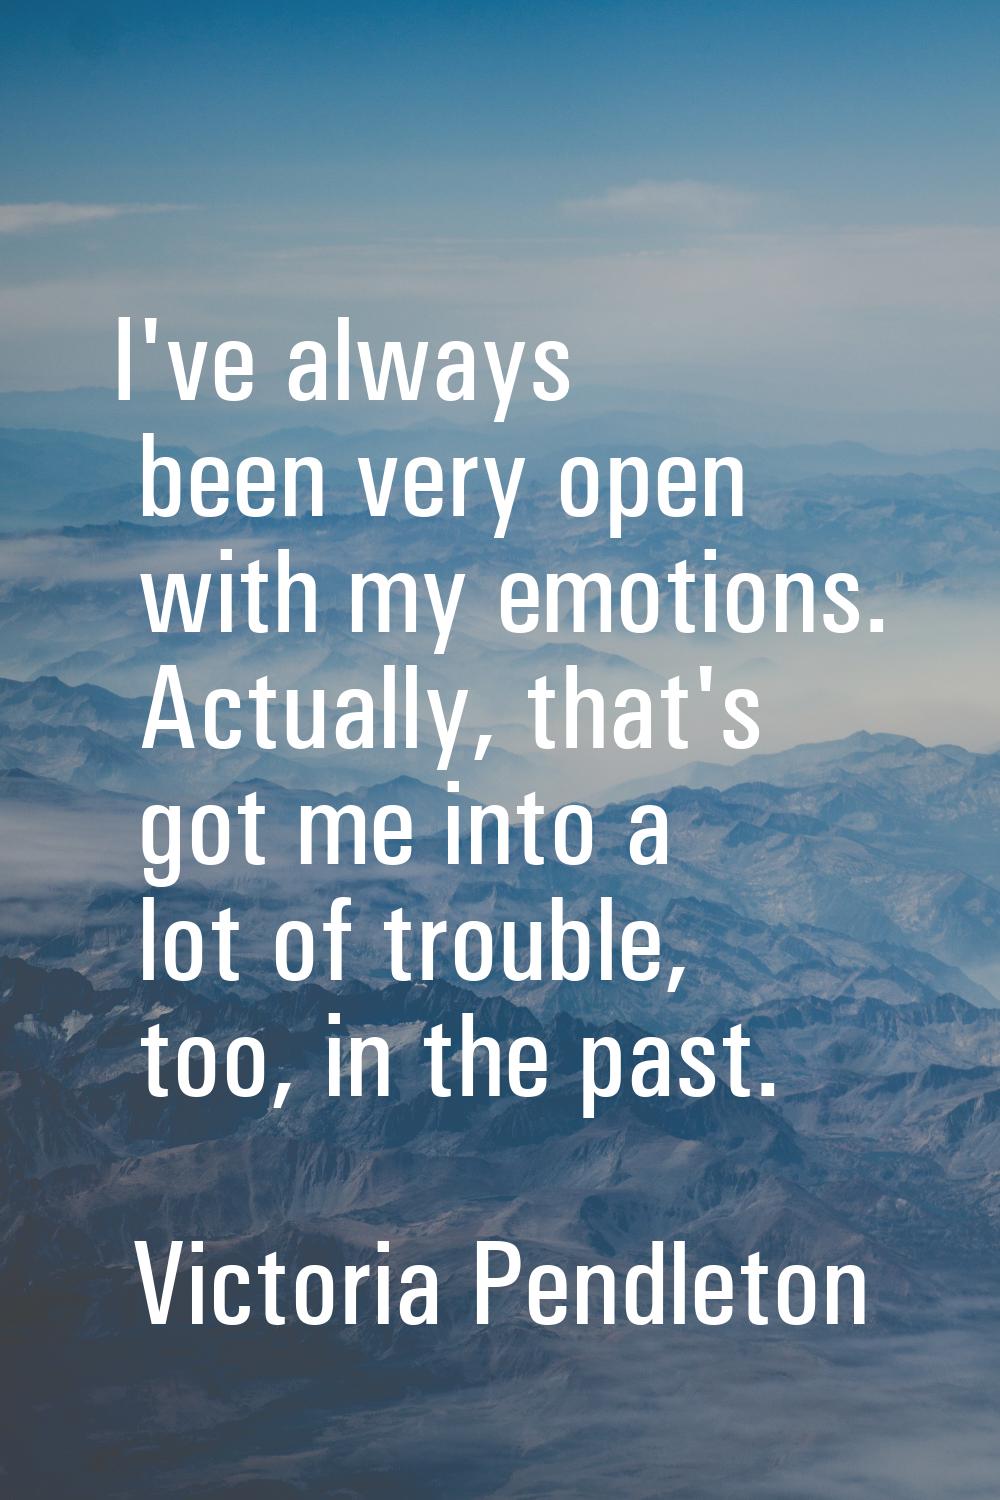 I've always been very open with my emotions. Actually, that's got me into a lot of trouble, too, in